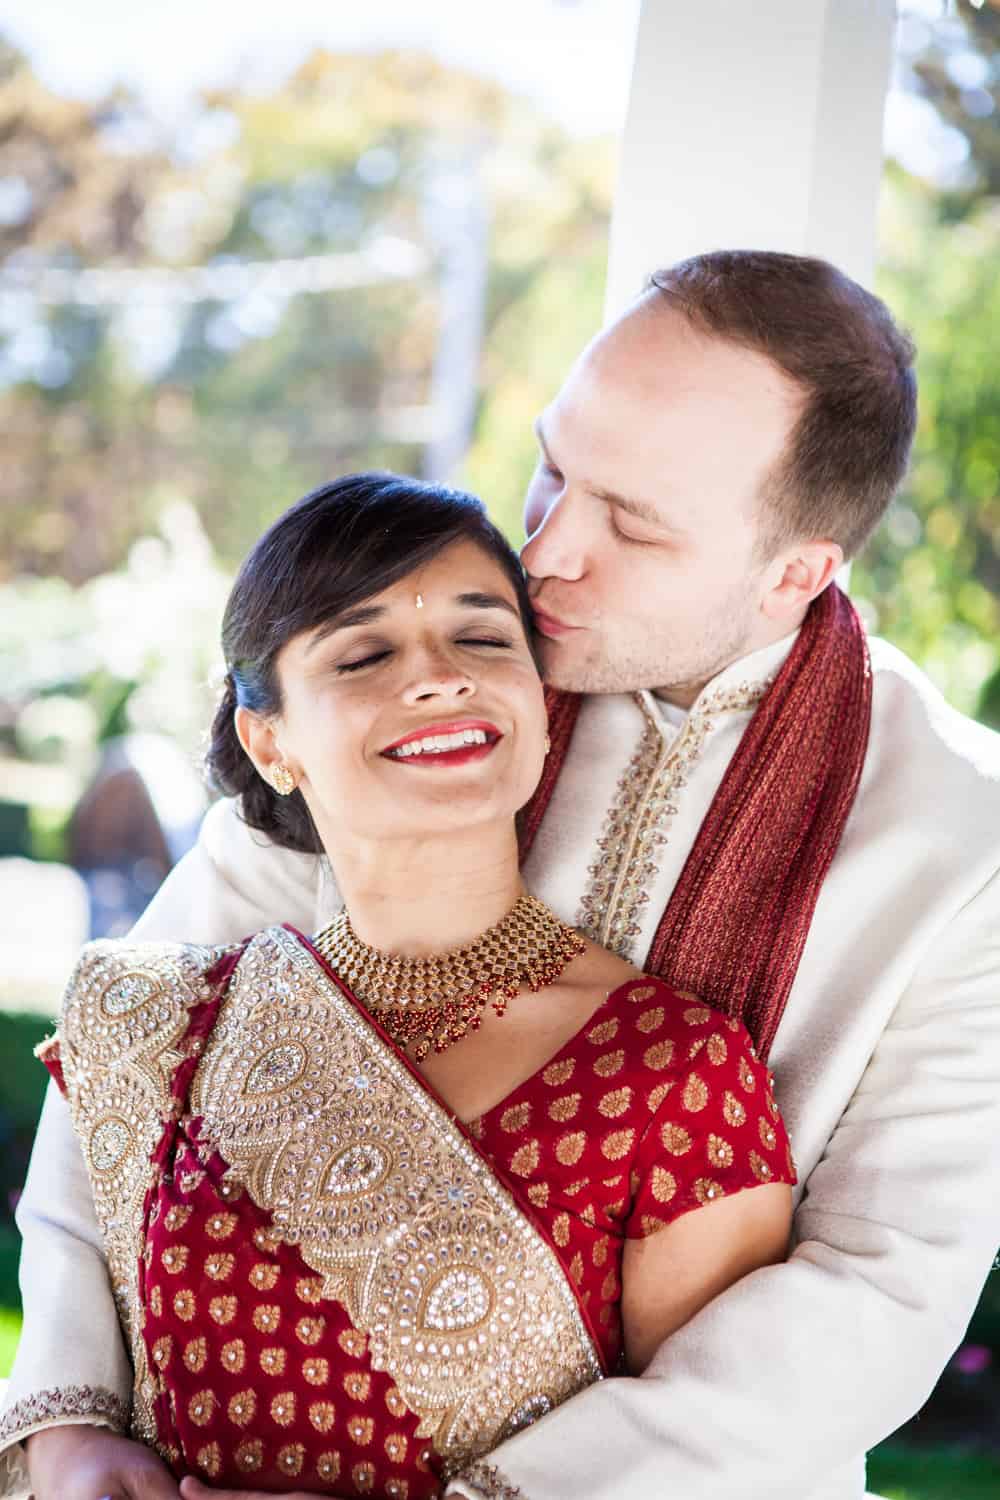 Groom kissing bride while wearing traditional Indian attire Bride and groom wearing traditional wedding attire at an East Wind Inn wedding